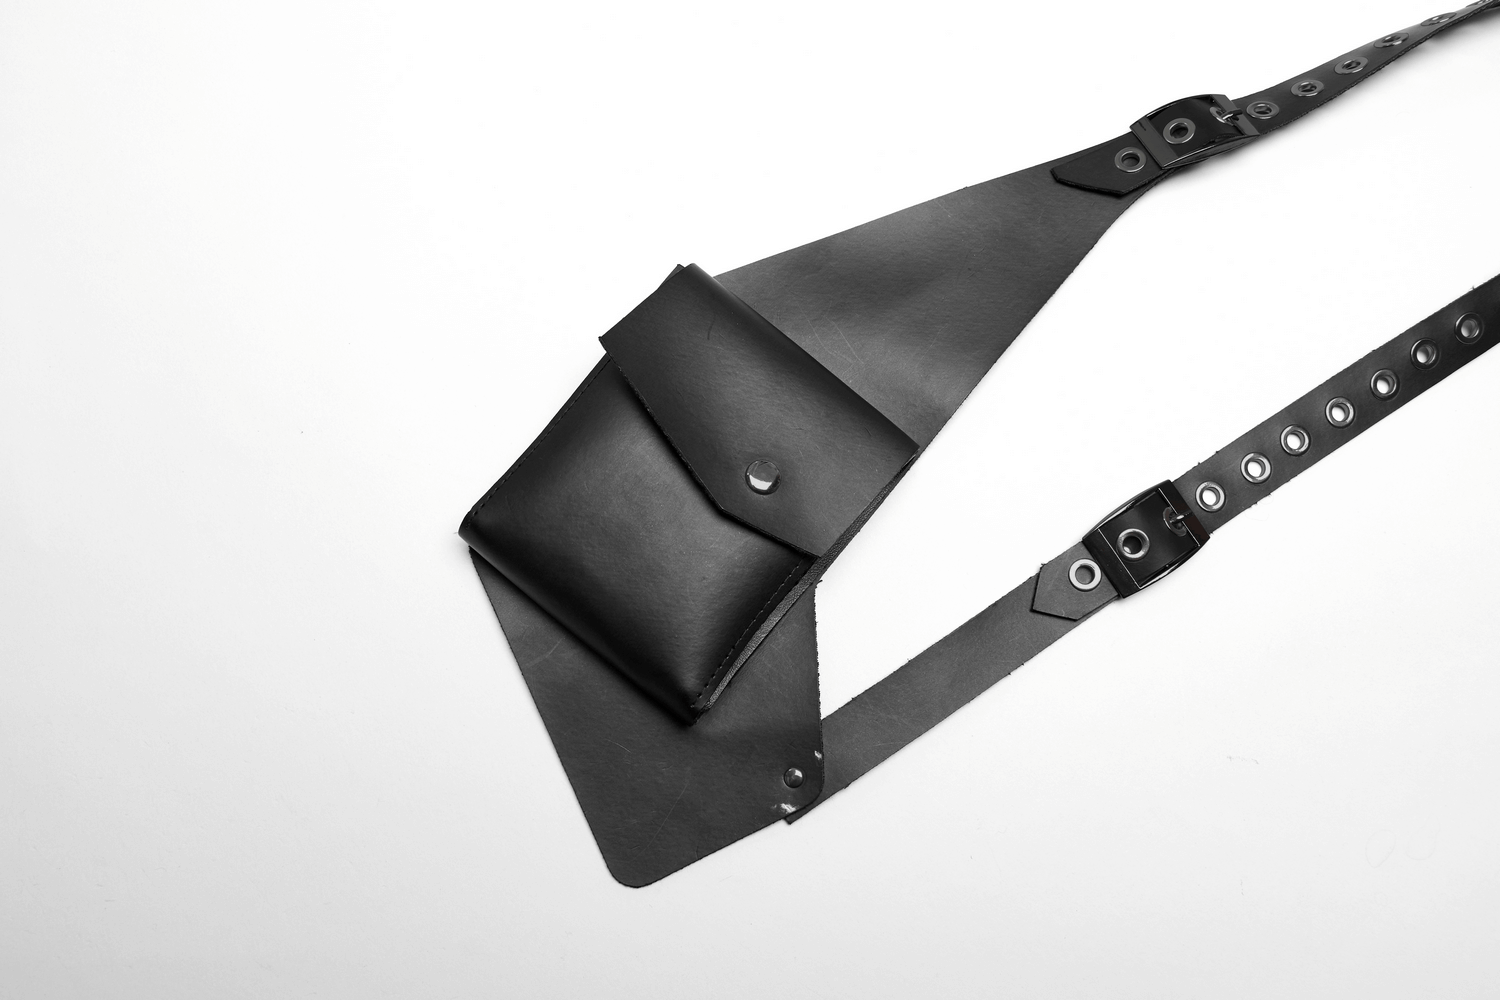 Leather Harness Chest Rig with Utility Pouches